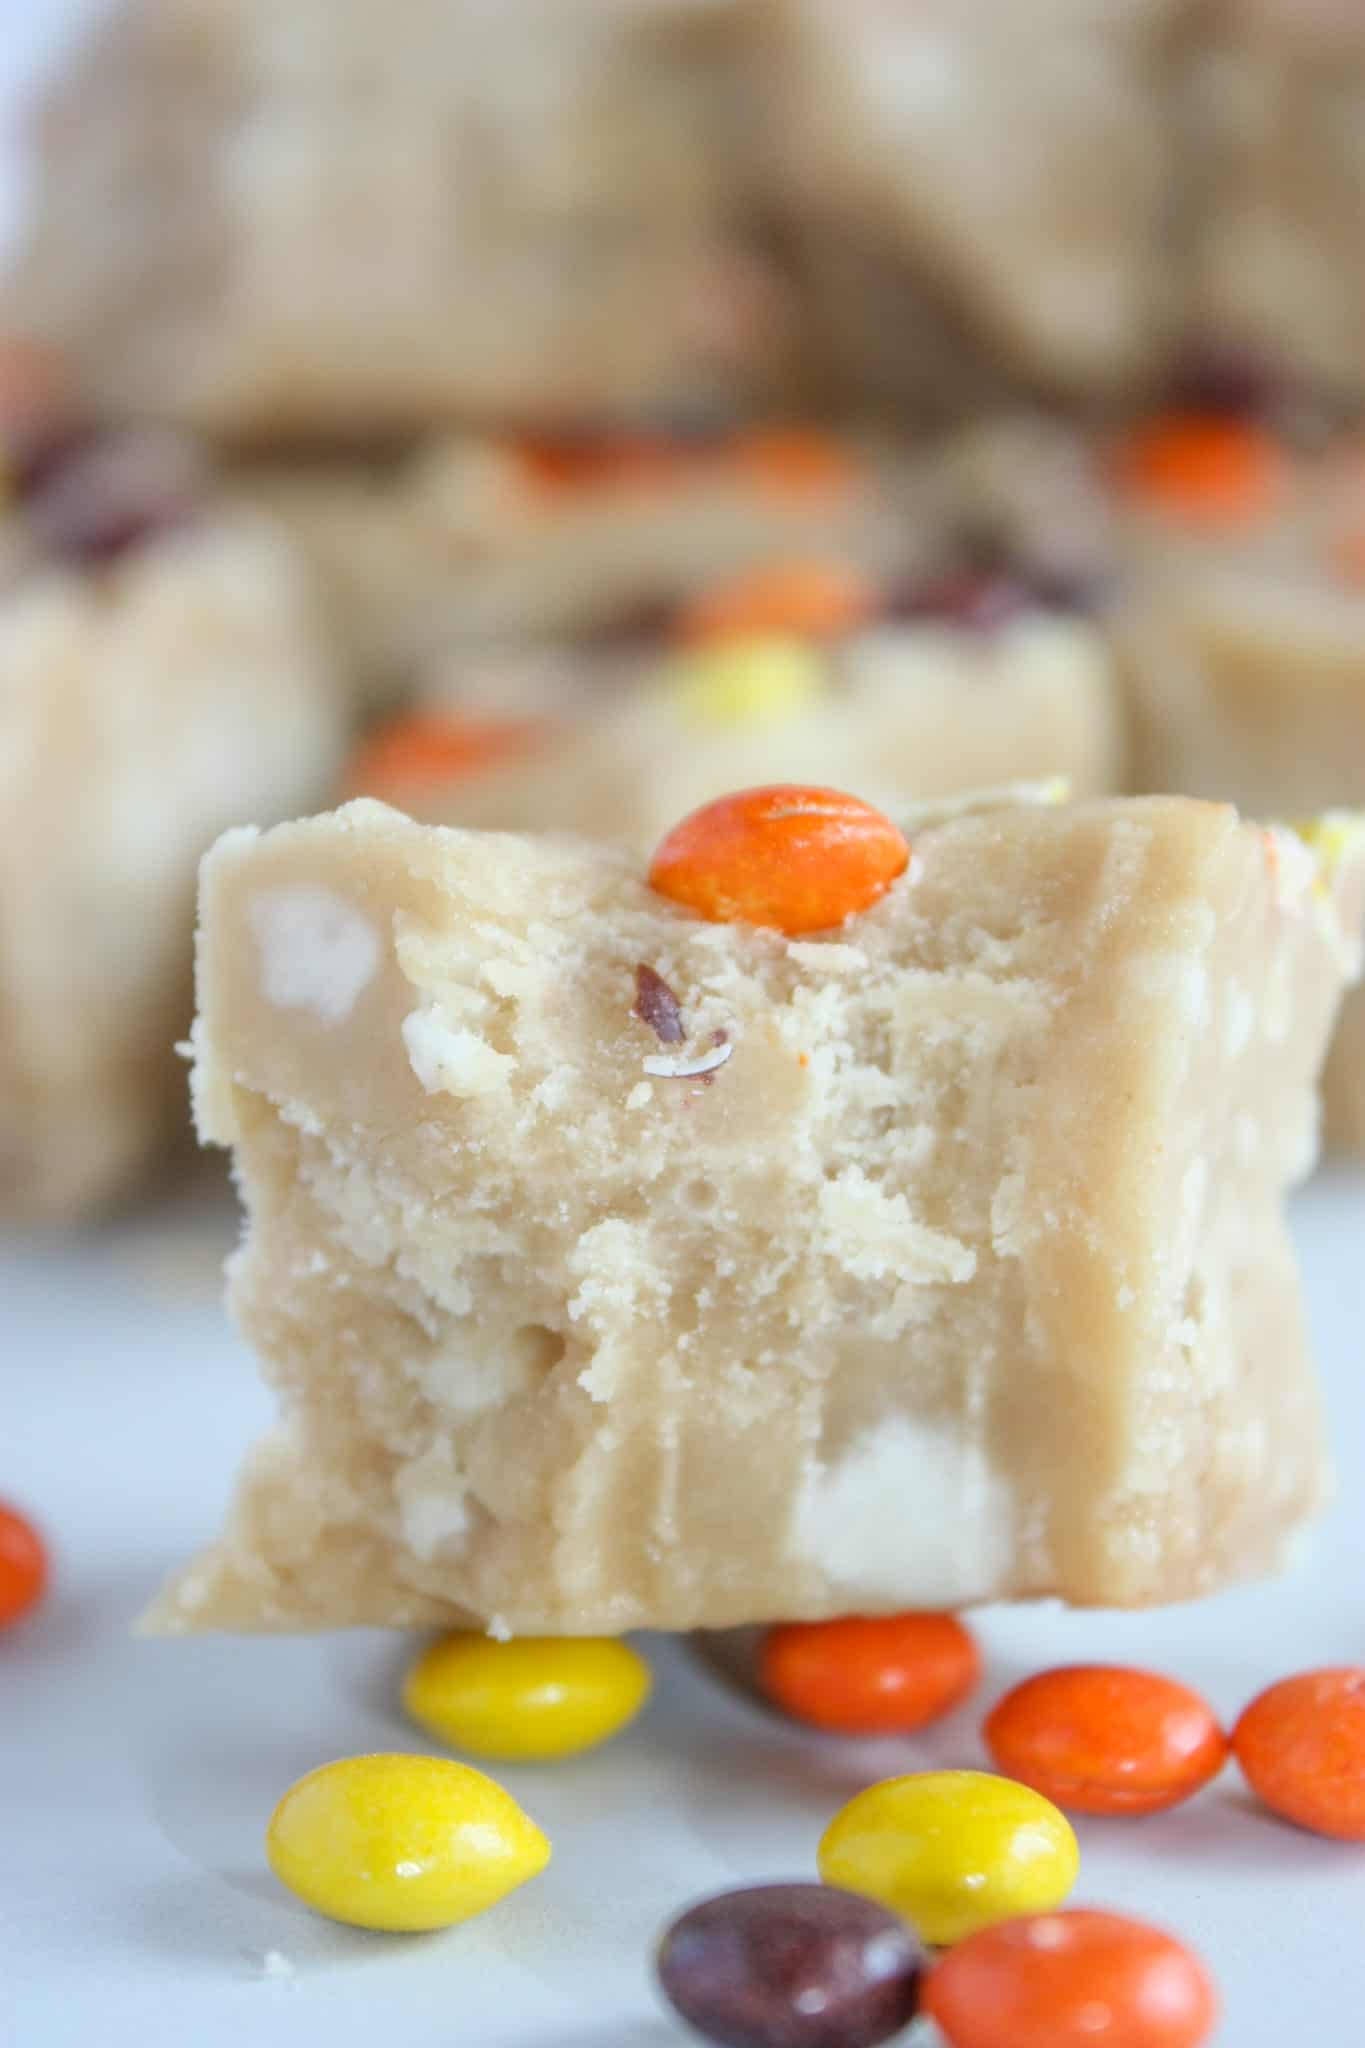 Peanut Butter Fudge is a creamy, decadent treat that will quickly be devoured.  This easy recipe does not require a candy thermometer and can be made in minutes.